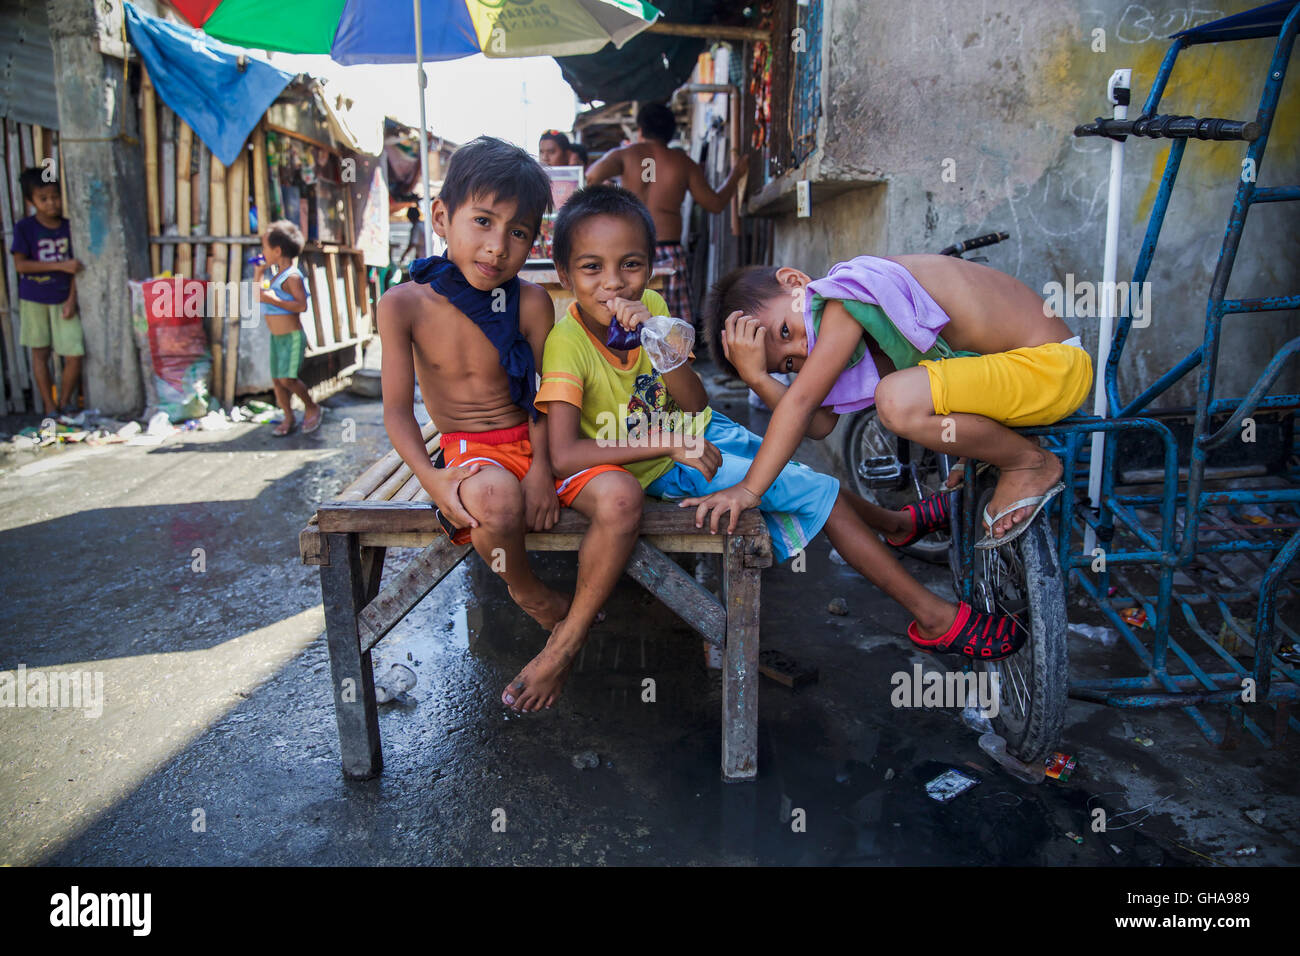 People, faces and stories from Cebu City on Cebu Island – Philippines Stock Photo